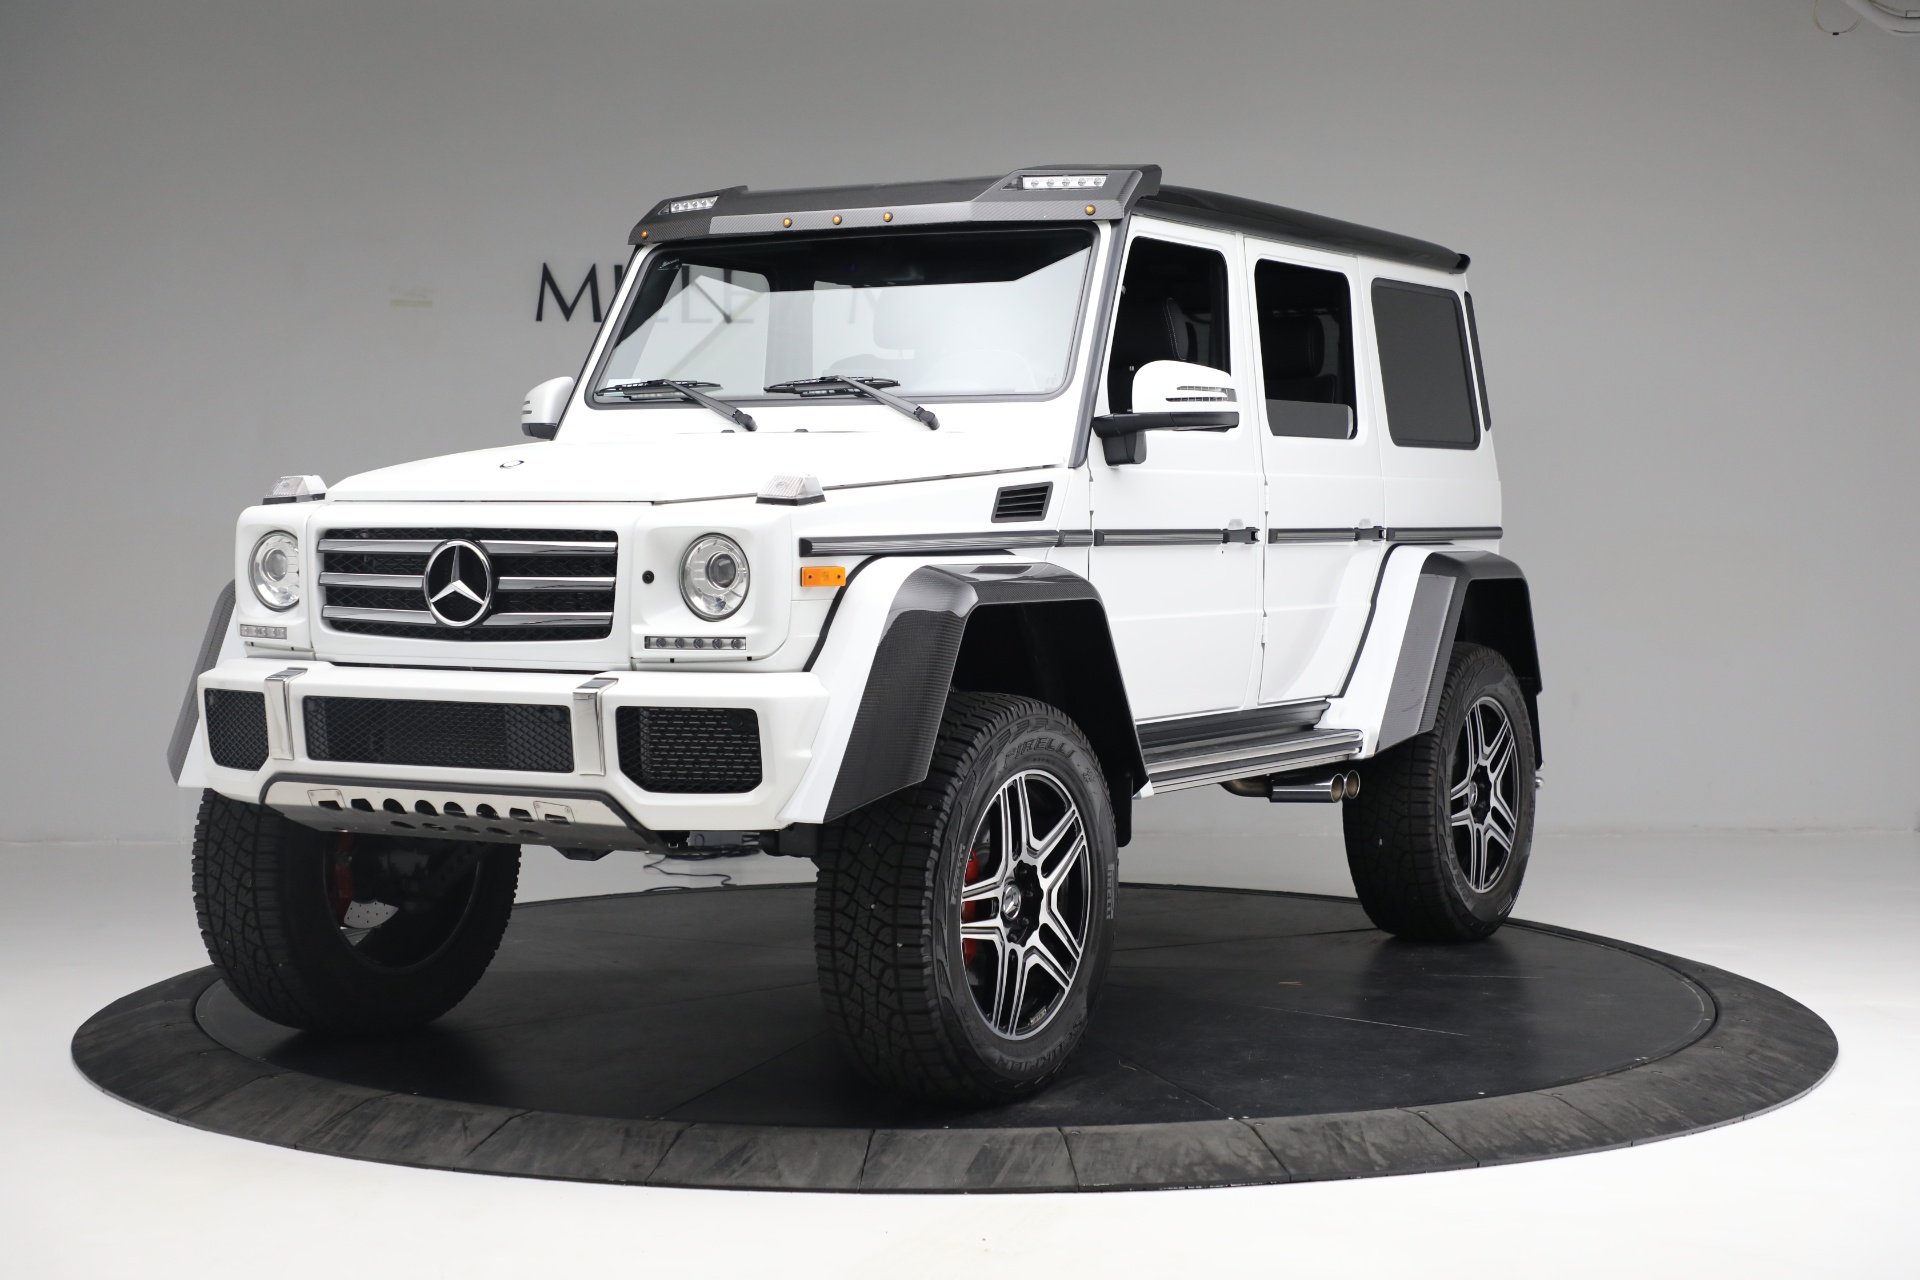 Used 2017 Mercedes-Benz G-Class G 550 4x4 Squared for sale $279,900 at Aston Martin of Greenwich in Greenwich CT 06830 1